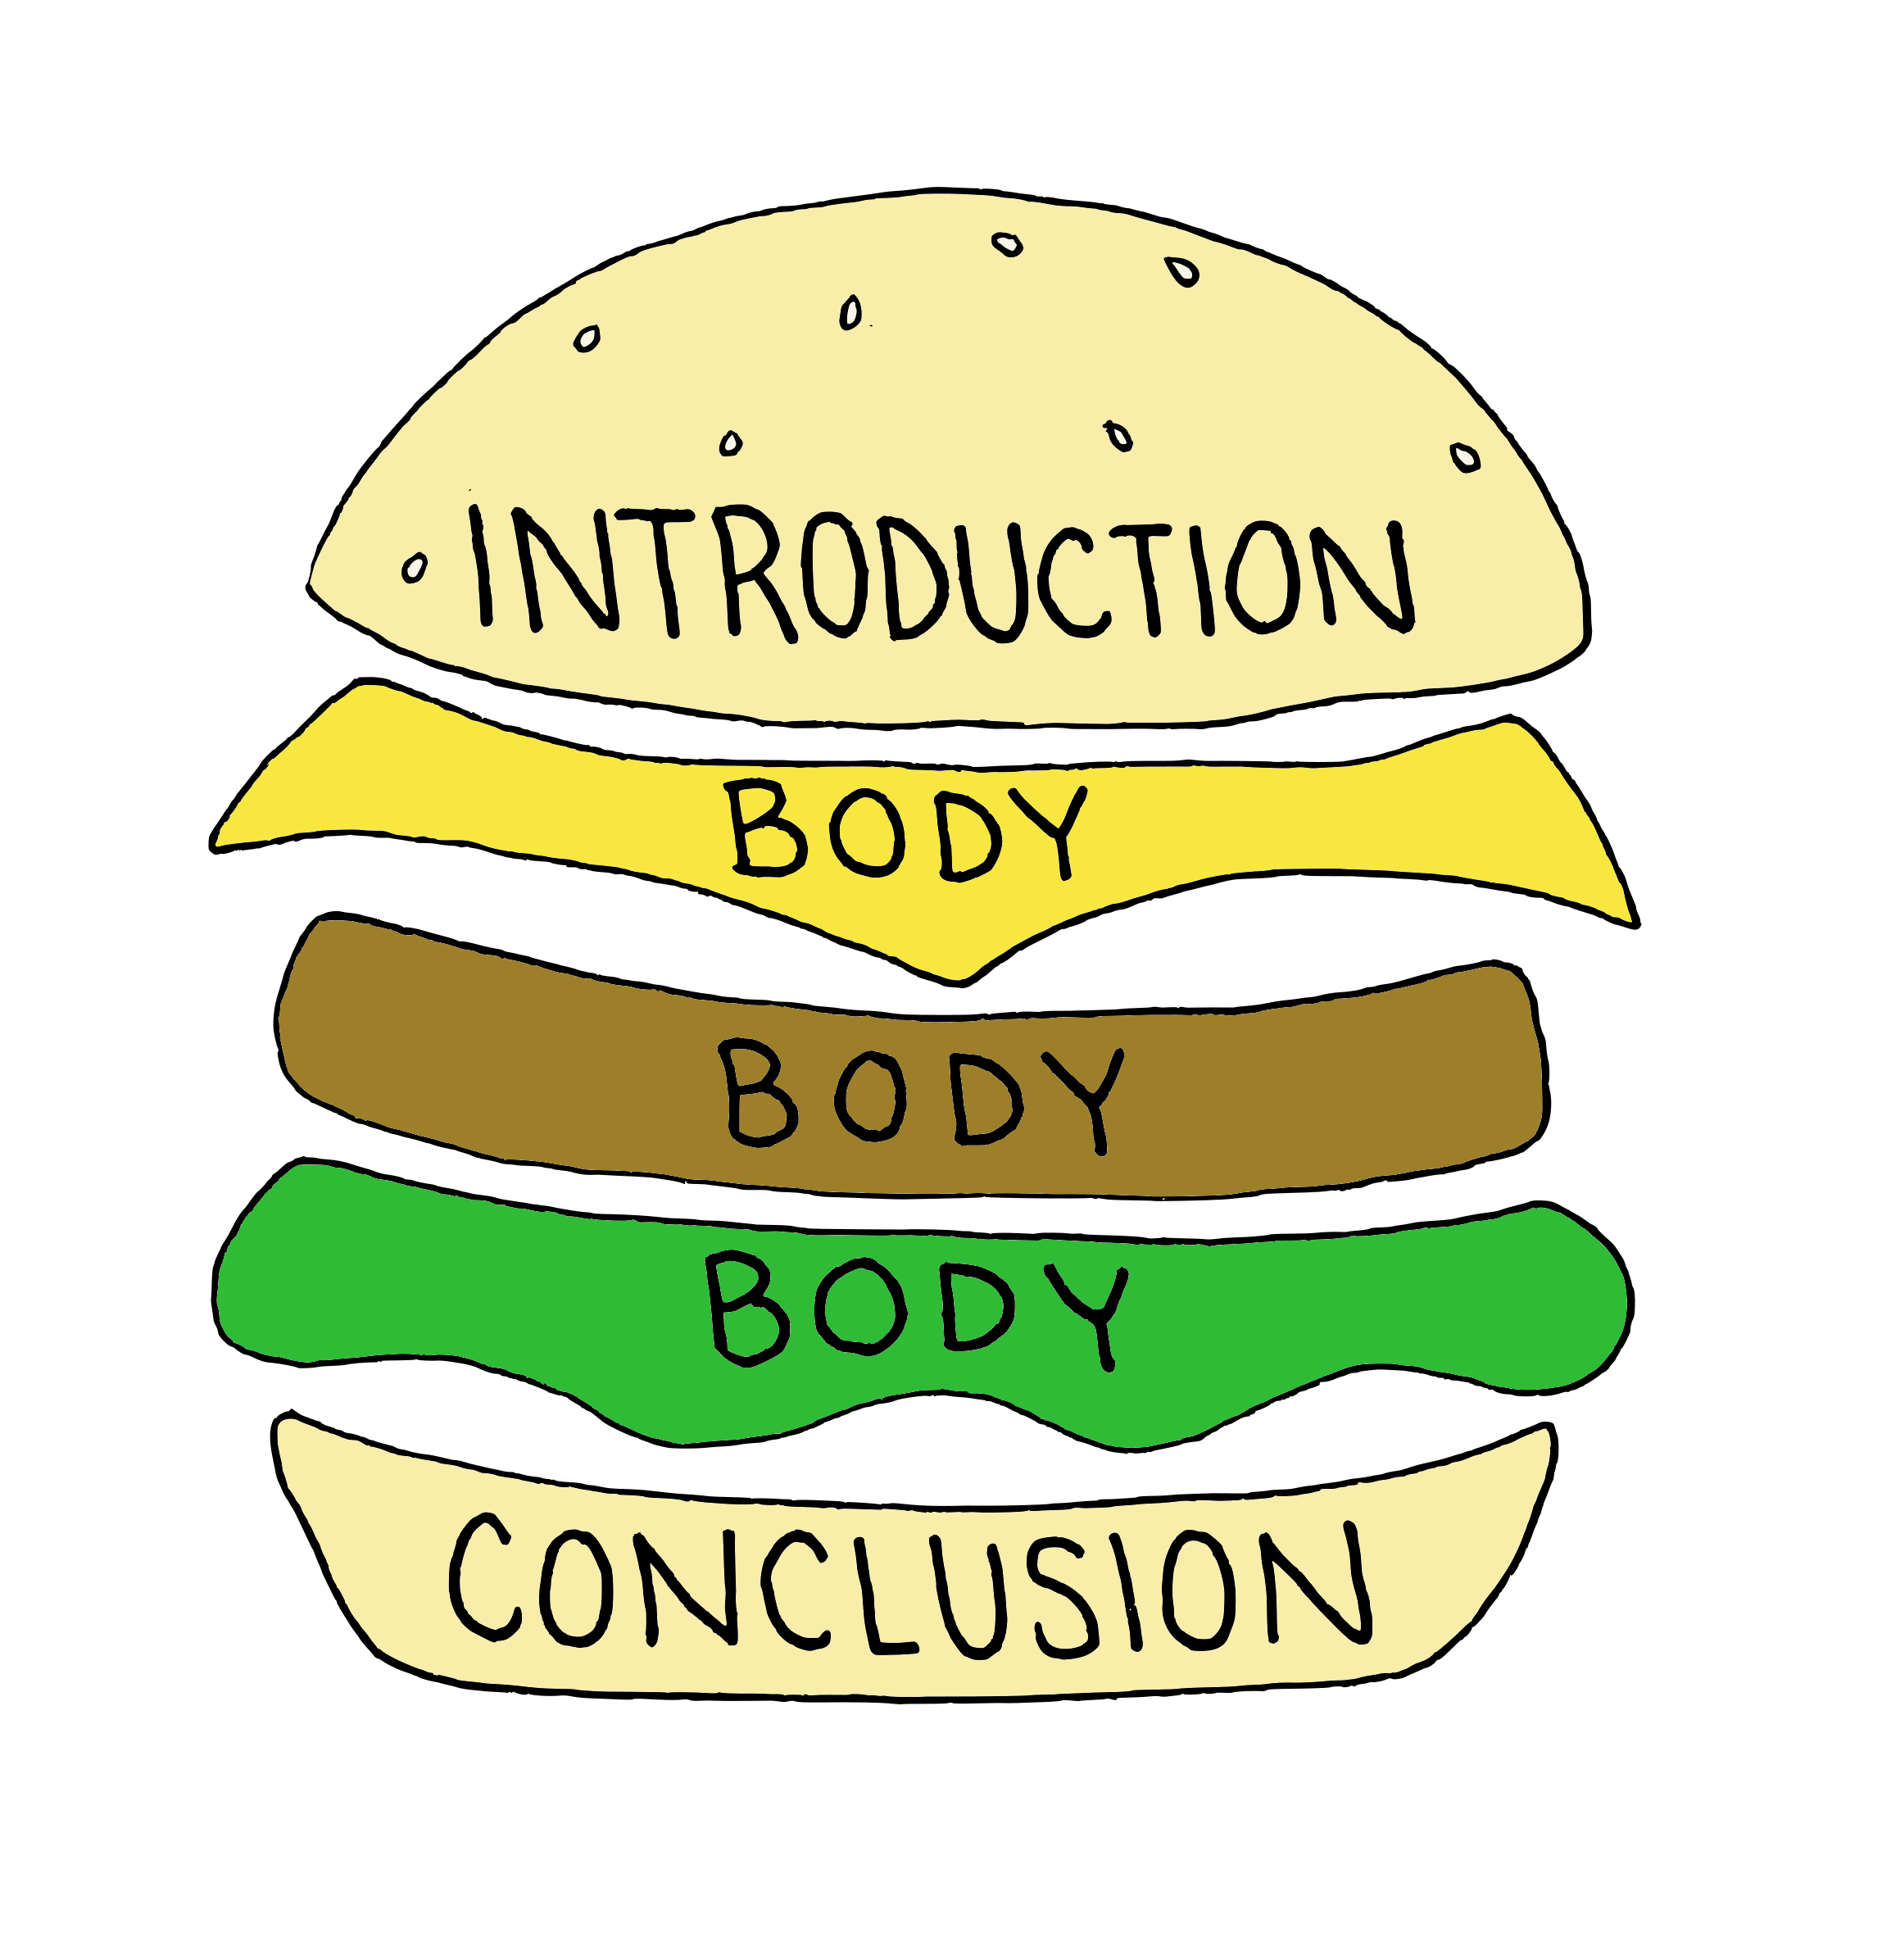 The buns of the burger represent the intro and conclusion and the 3 condiments in between represent the body paragraphs